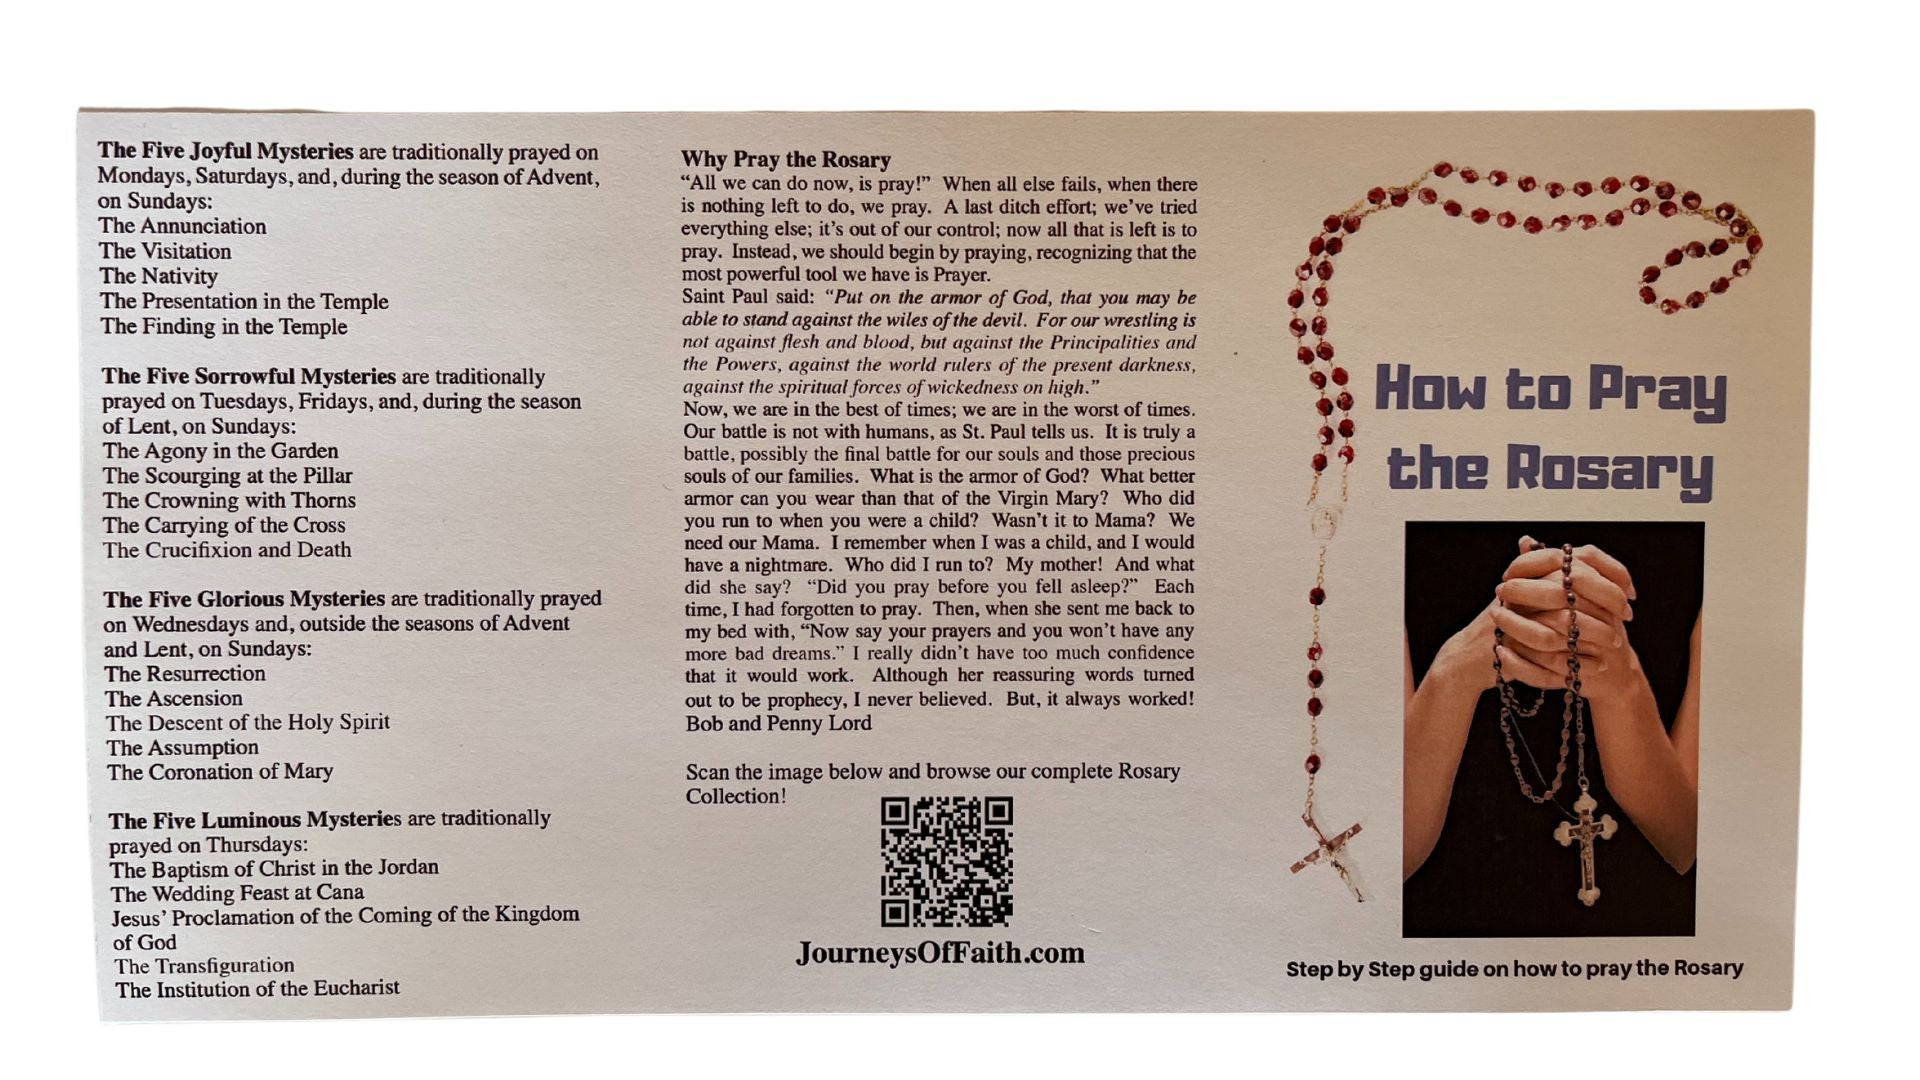 How to Pray the Rosary Prayer Cards Laminated - Bob and Penny Lord